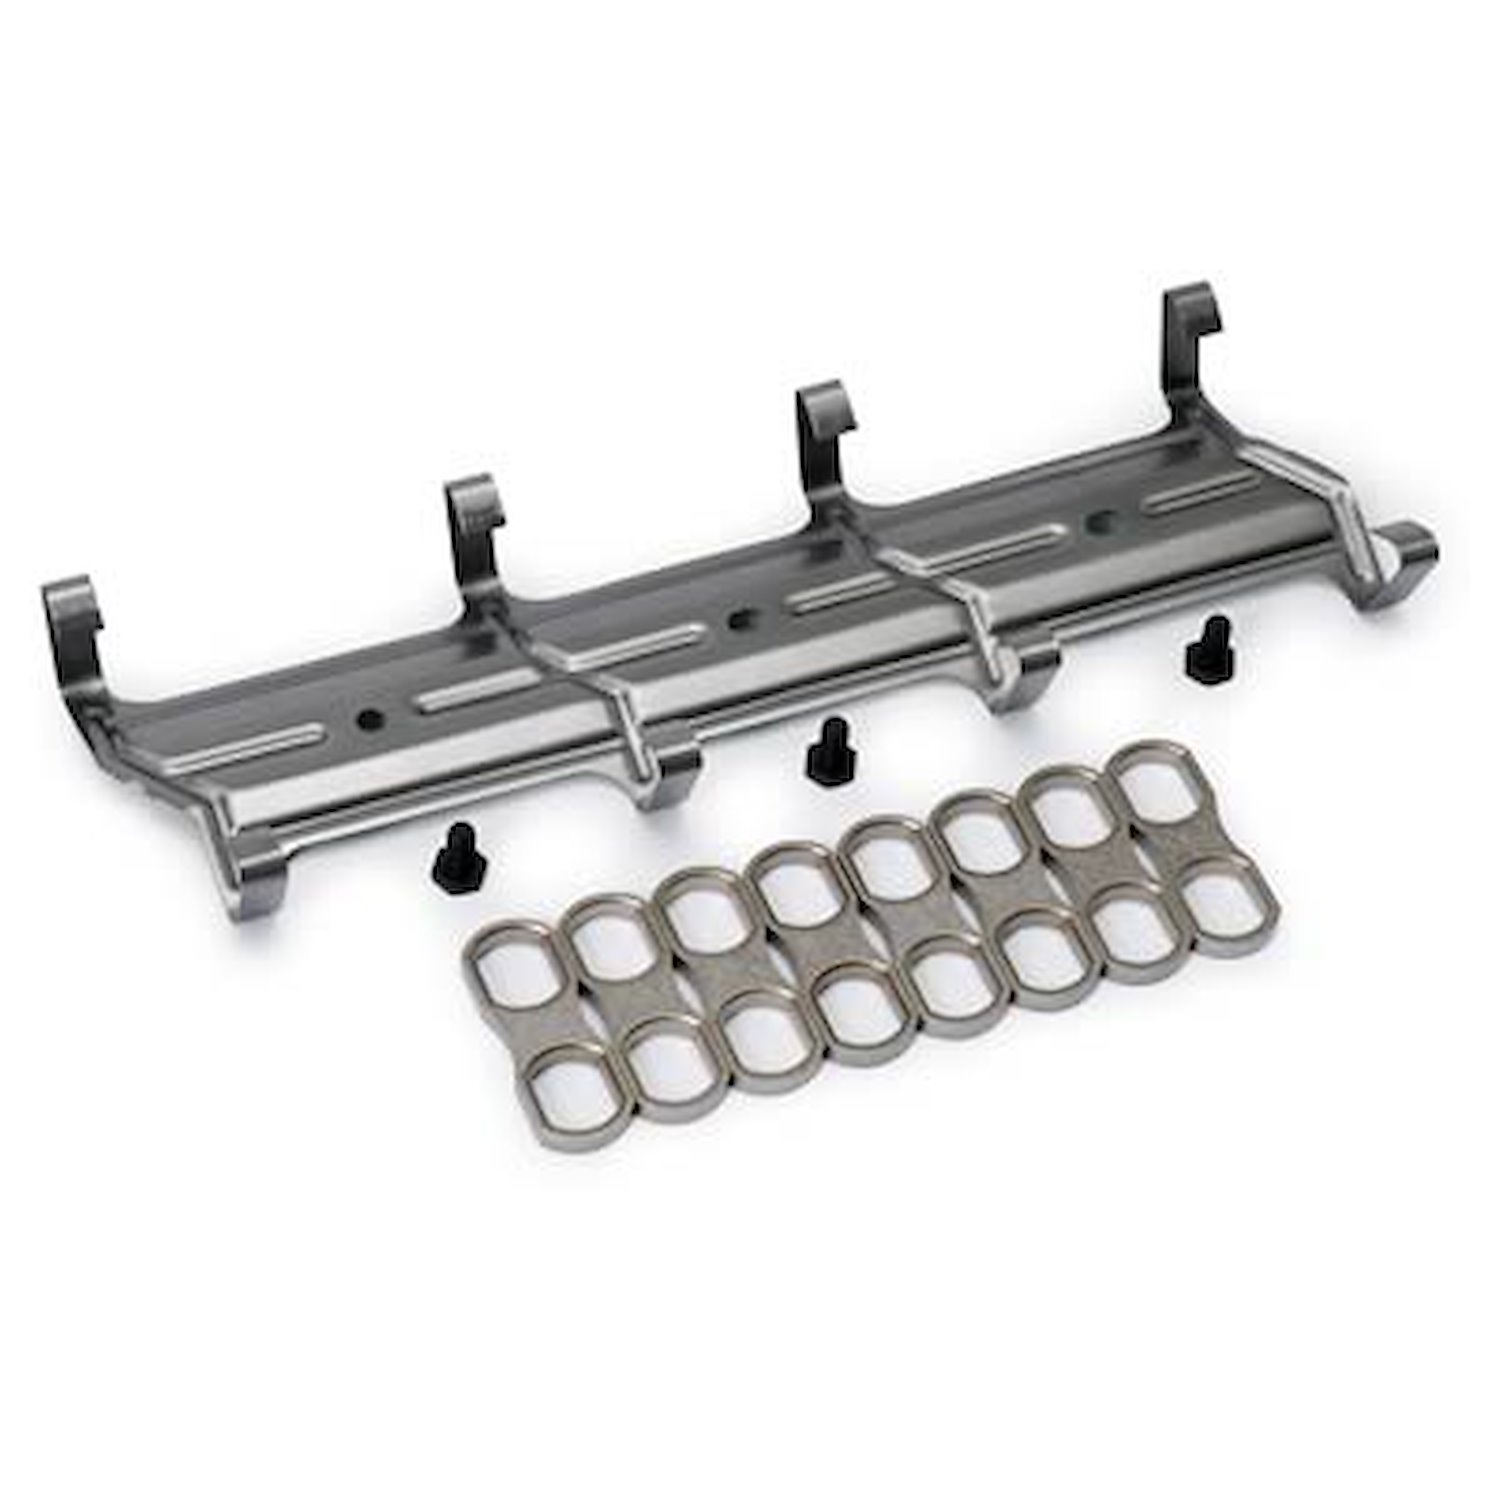 Lifter Installation Kit for 1987-Later Small Block Chevy 305-350